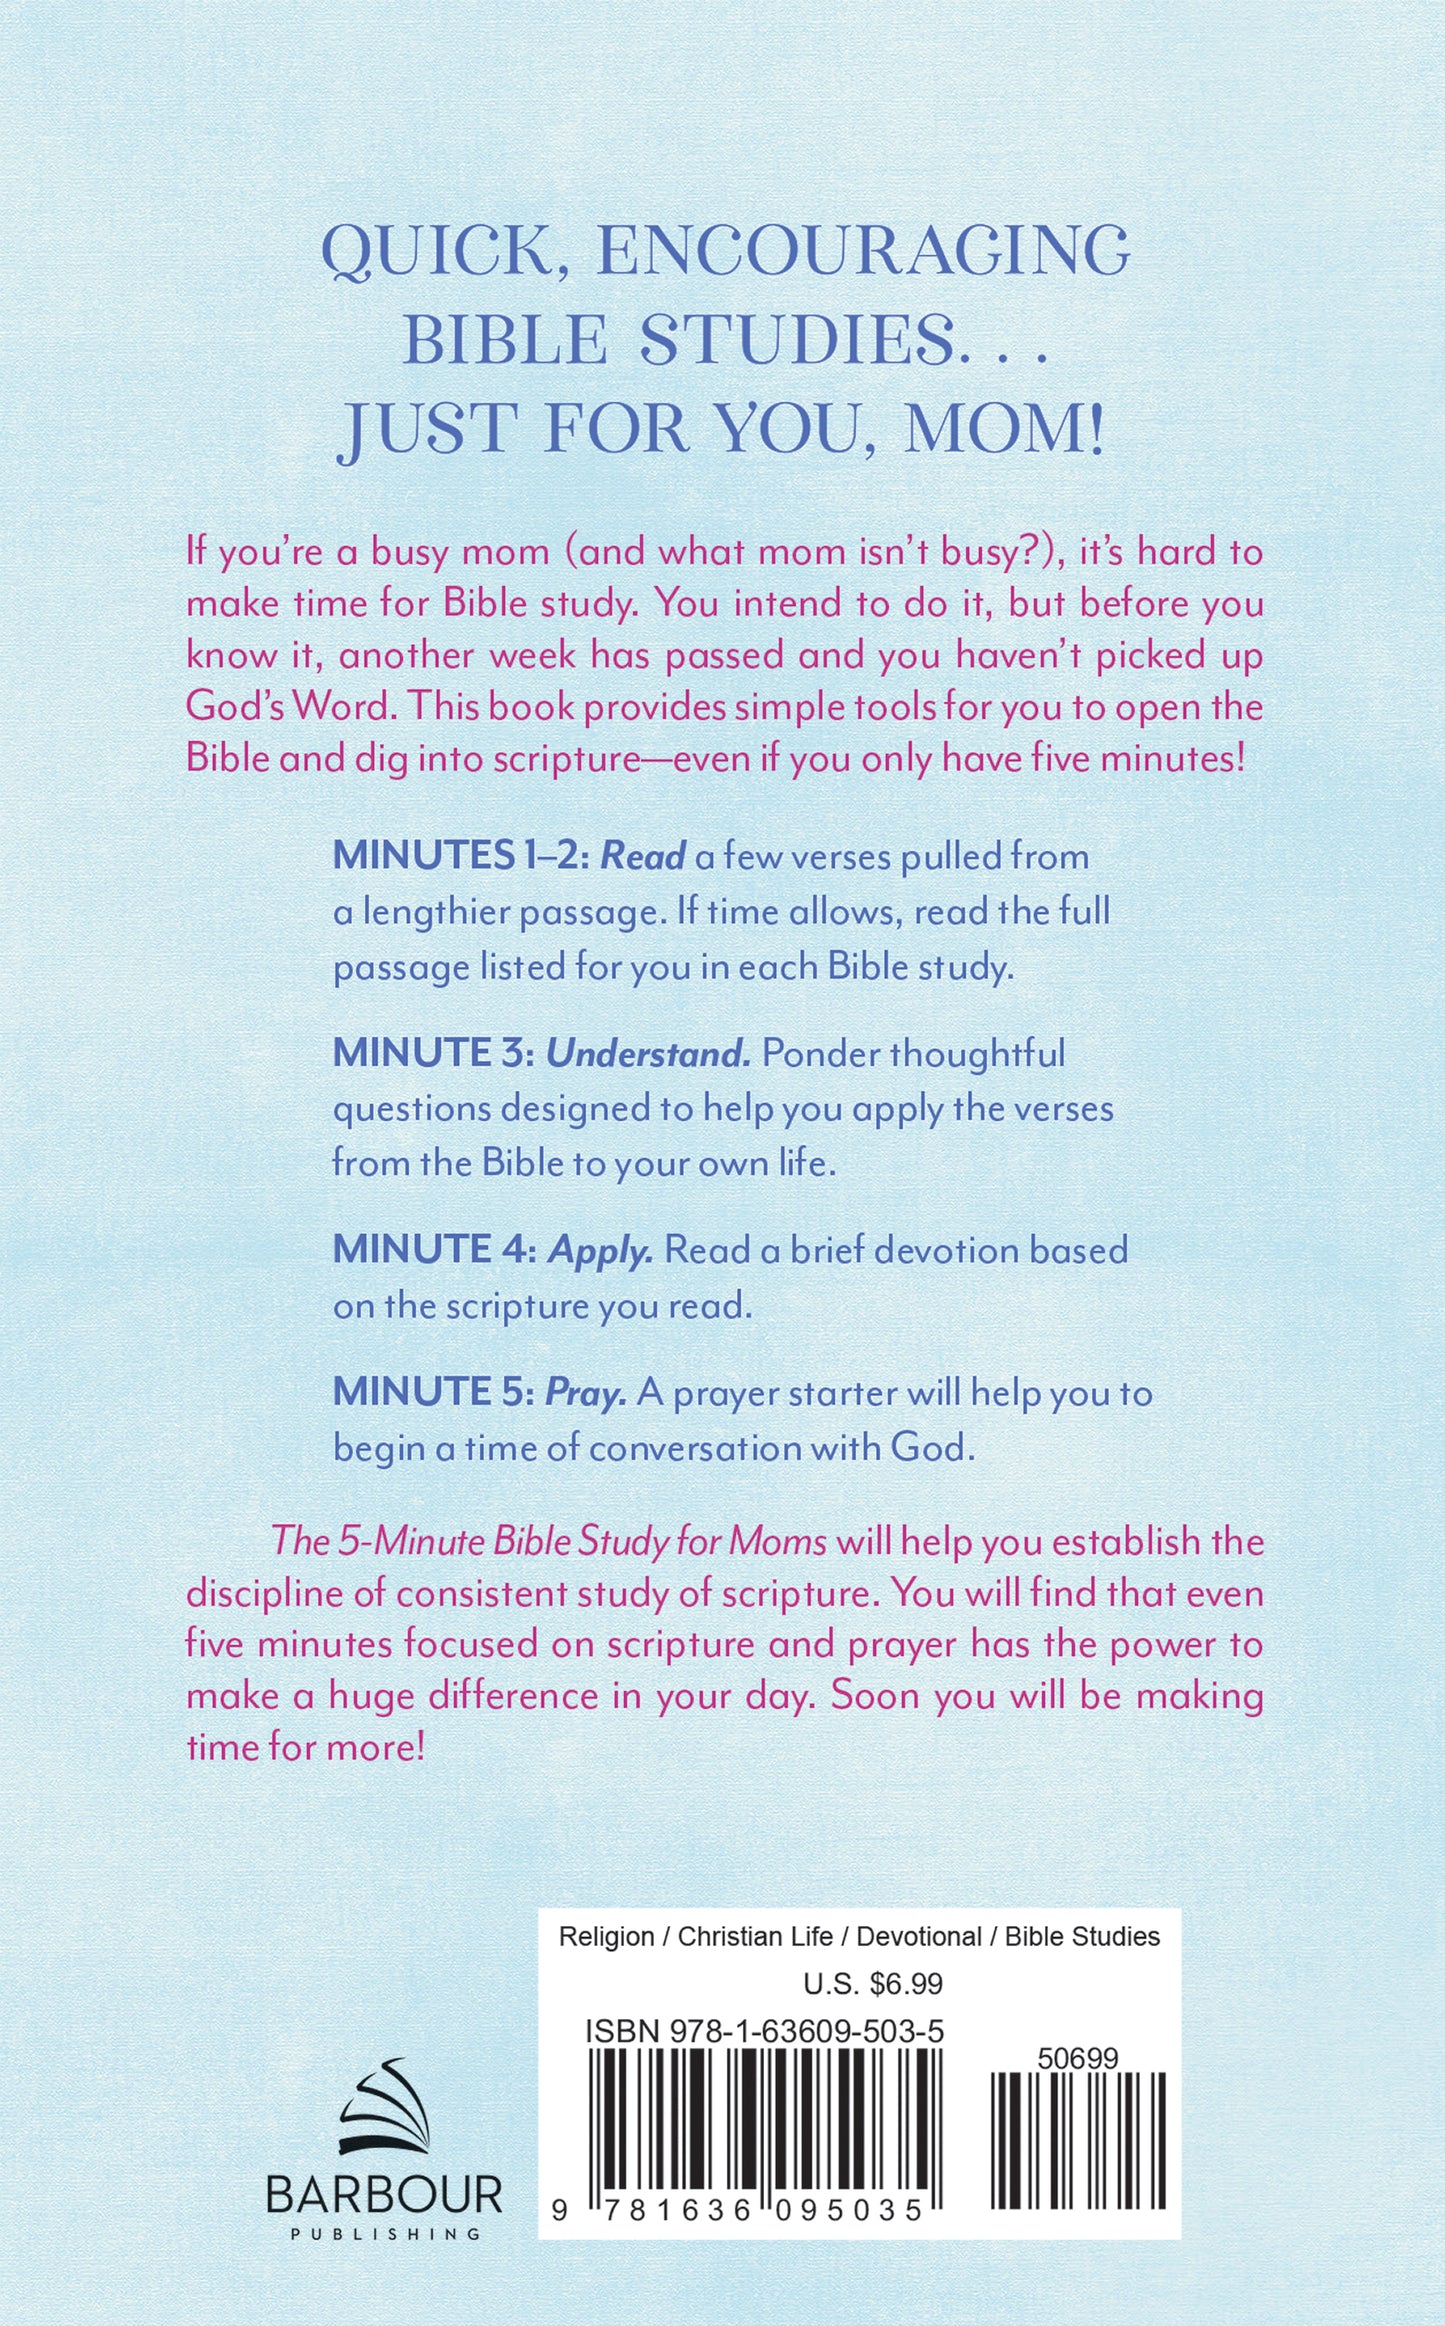 The 5-Minute Bible Study for Moms - The Christian Gift Company